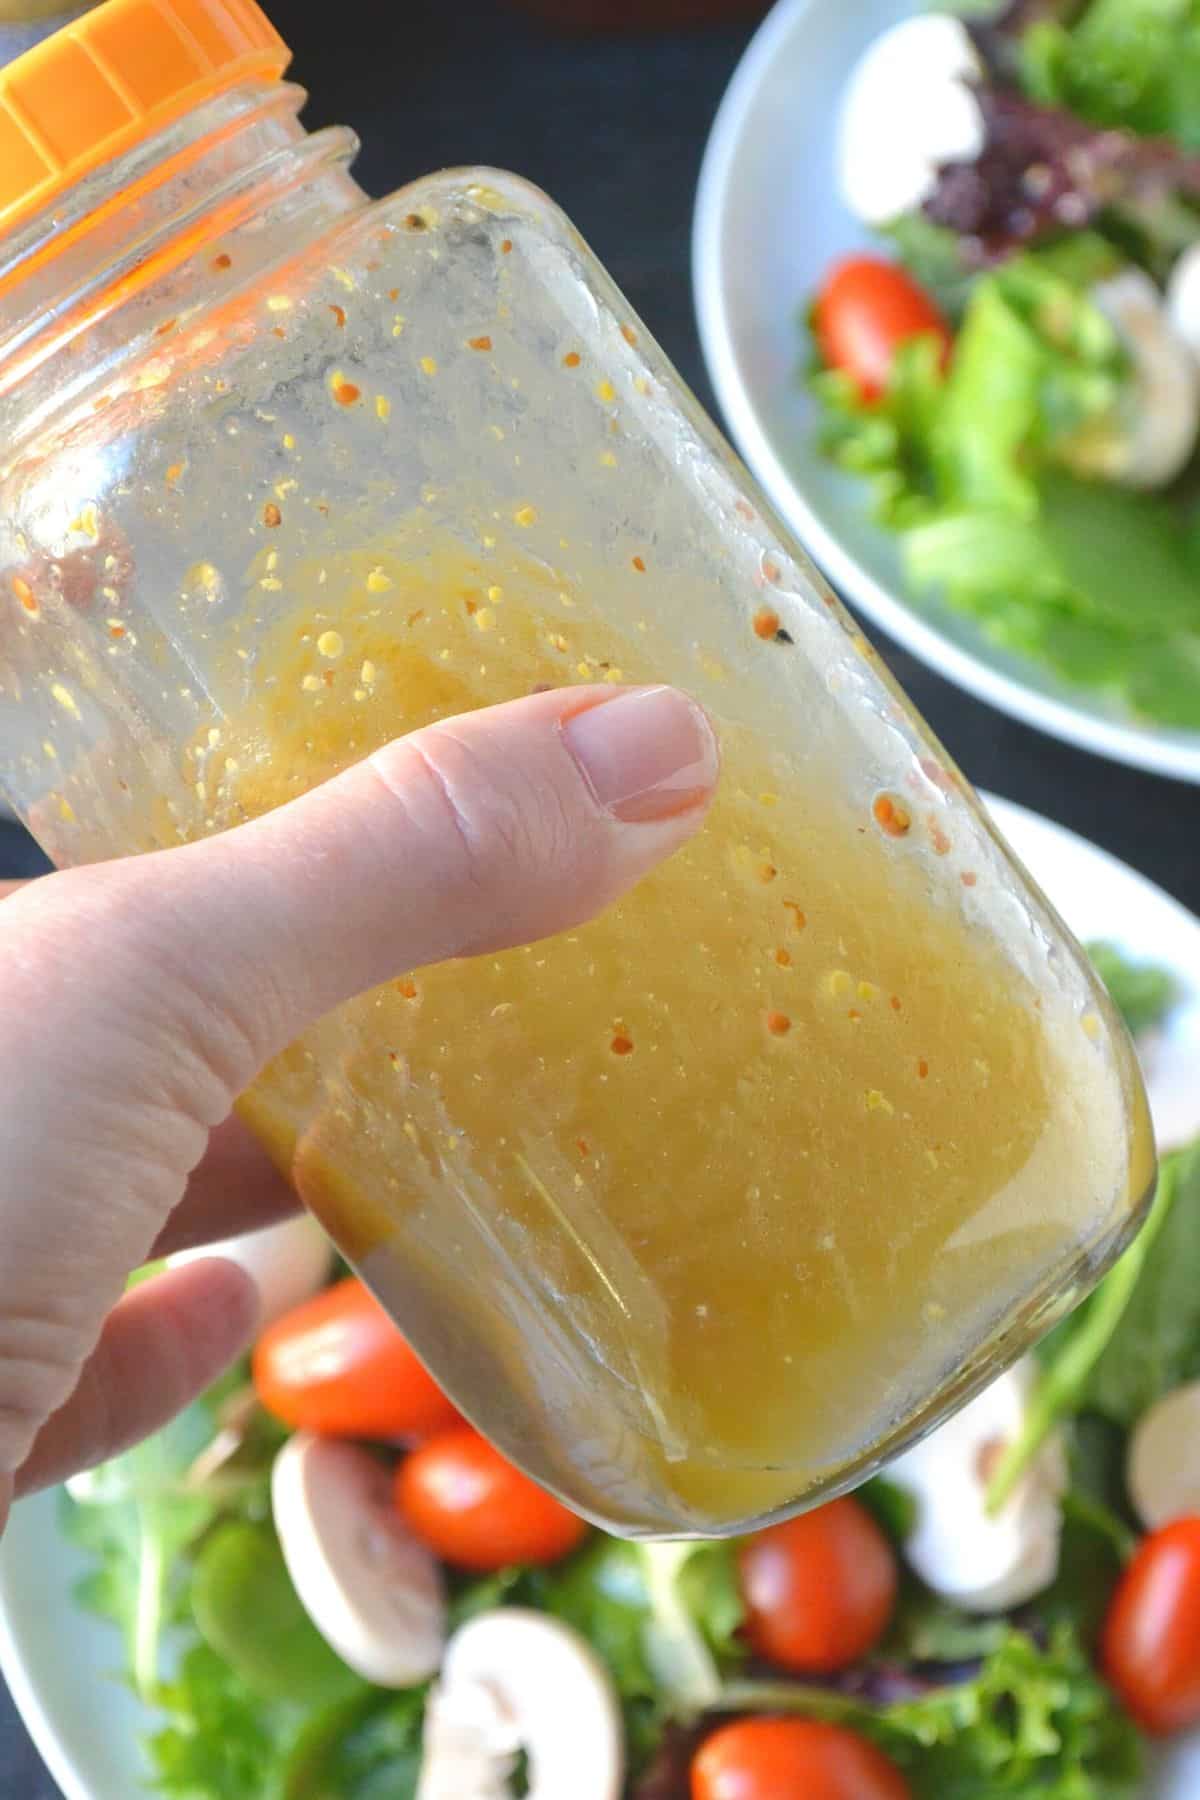 Close up of hand shaking bottle of salad dressing above plates of salad